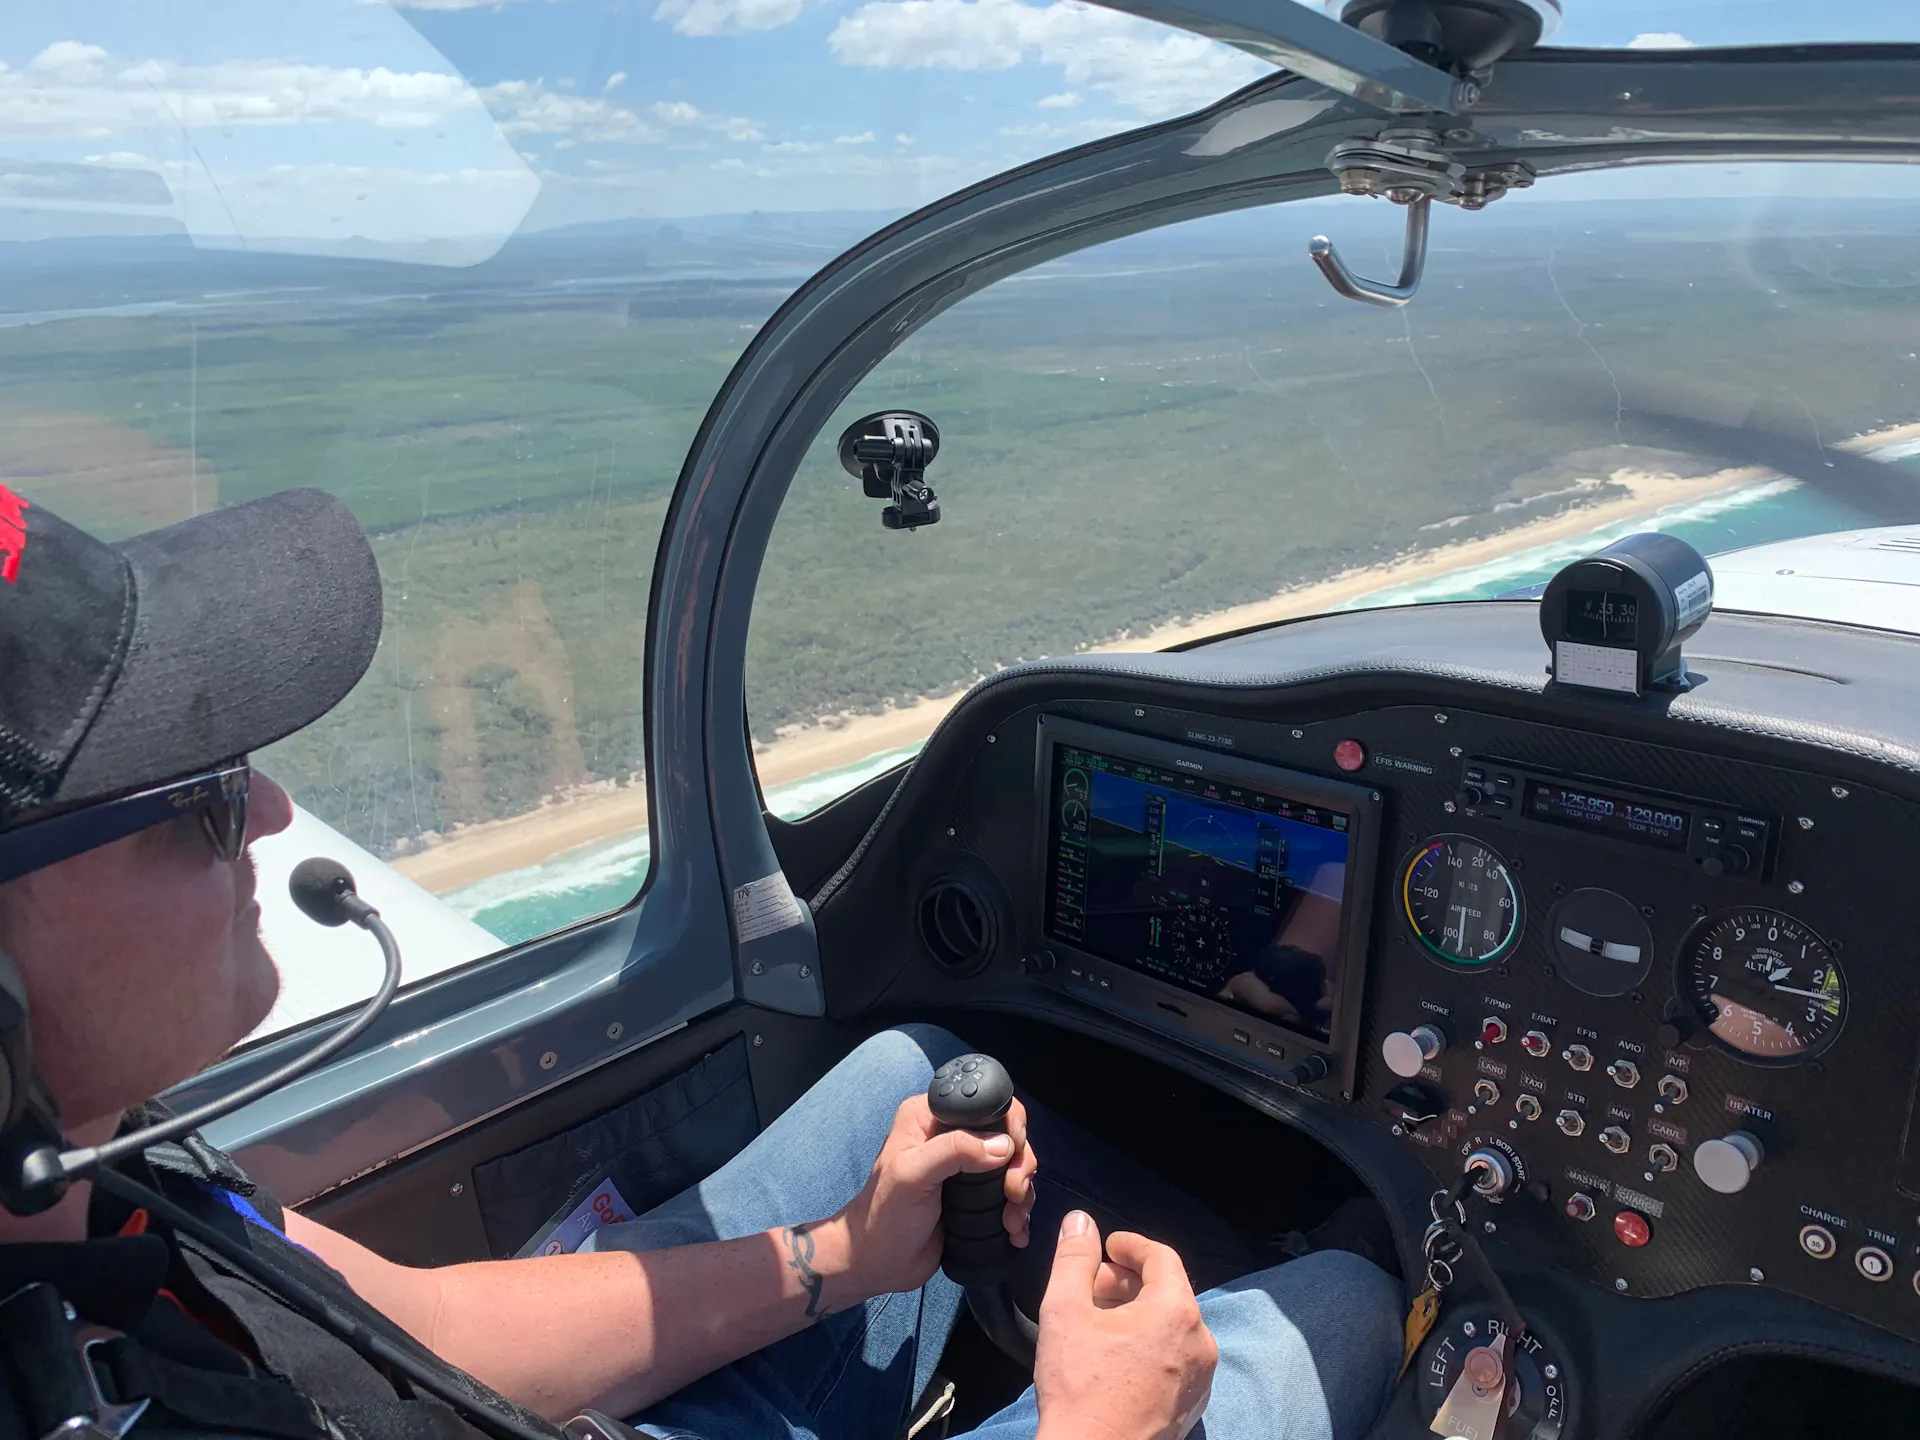 Steer plane while flying over coast